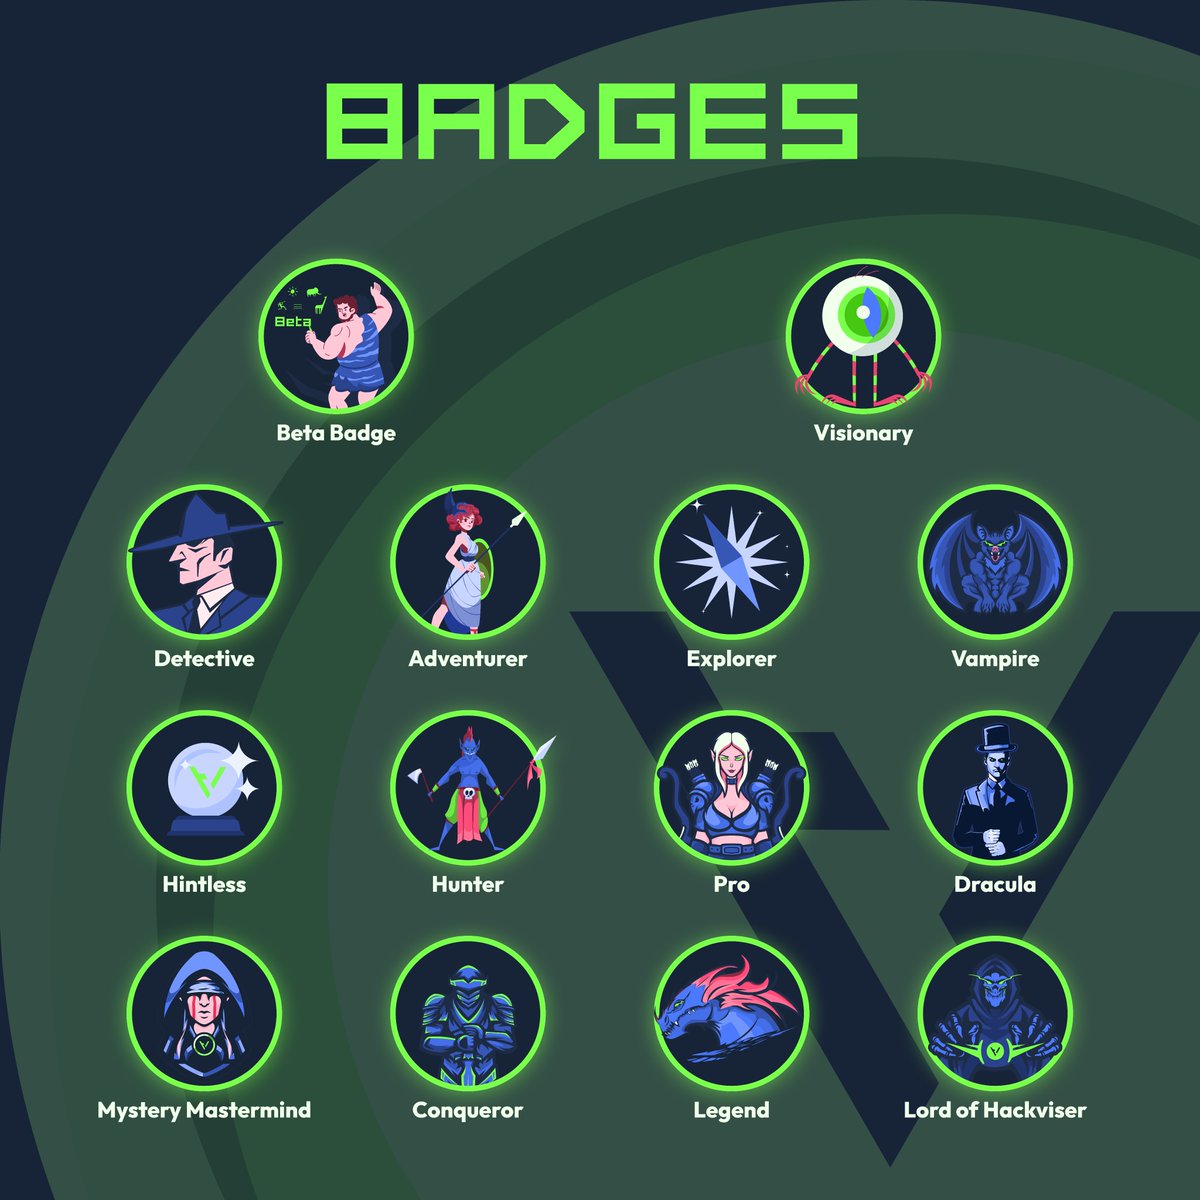 Showcasing badges on your profile is a powerful way to demonstrate your expertise in cybersecurity.

Don't miss out on the beta badge, which is exclusively available to our beta users.

Sign up now for our beta program!
🔗 hackviser.com

#cybersecurity #cyberrange